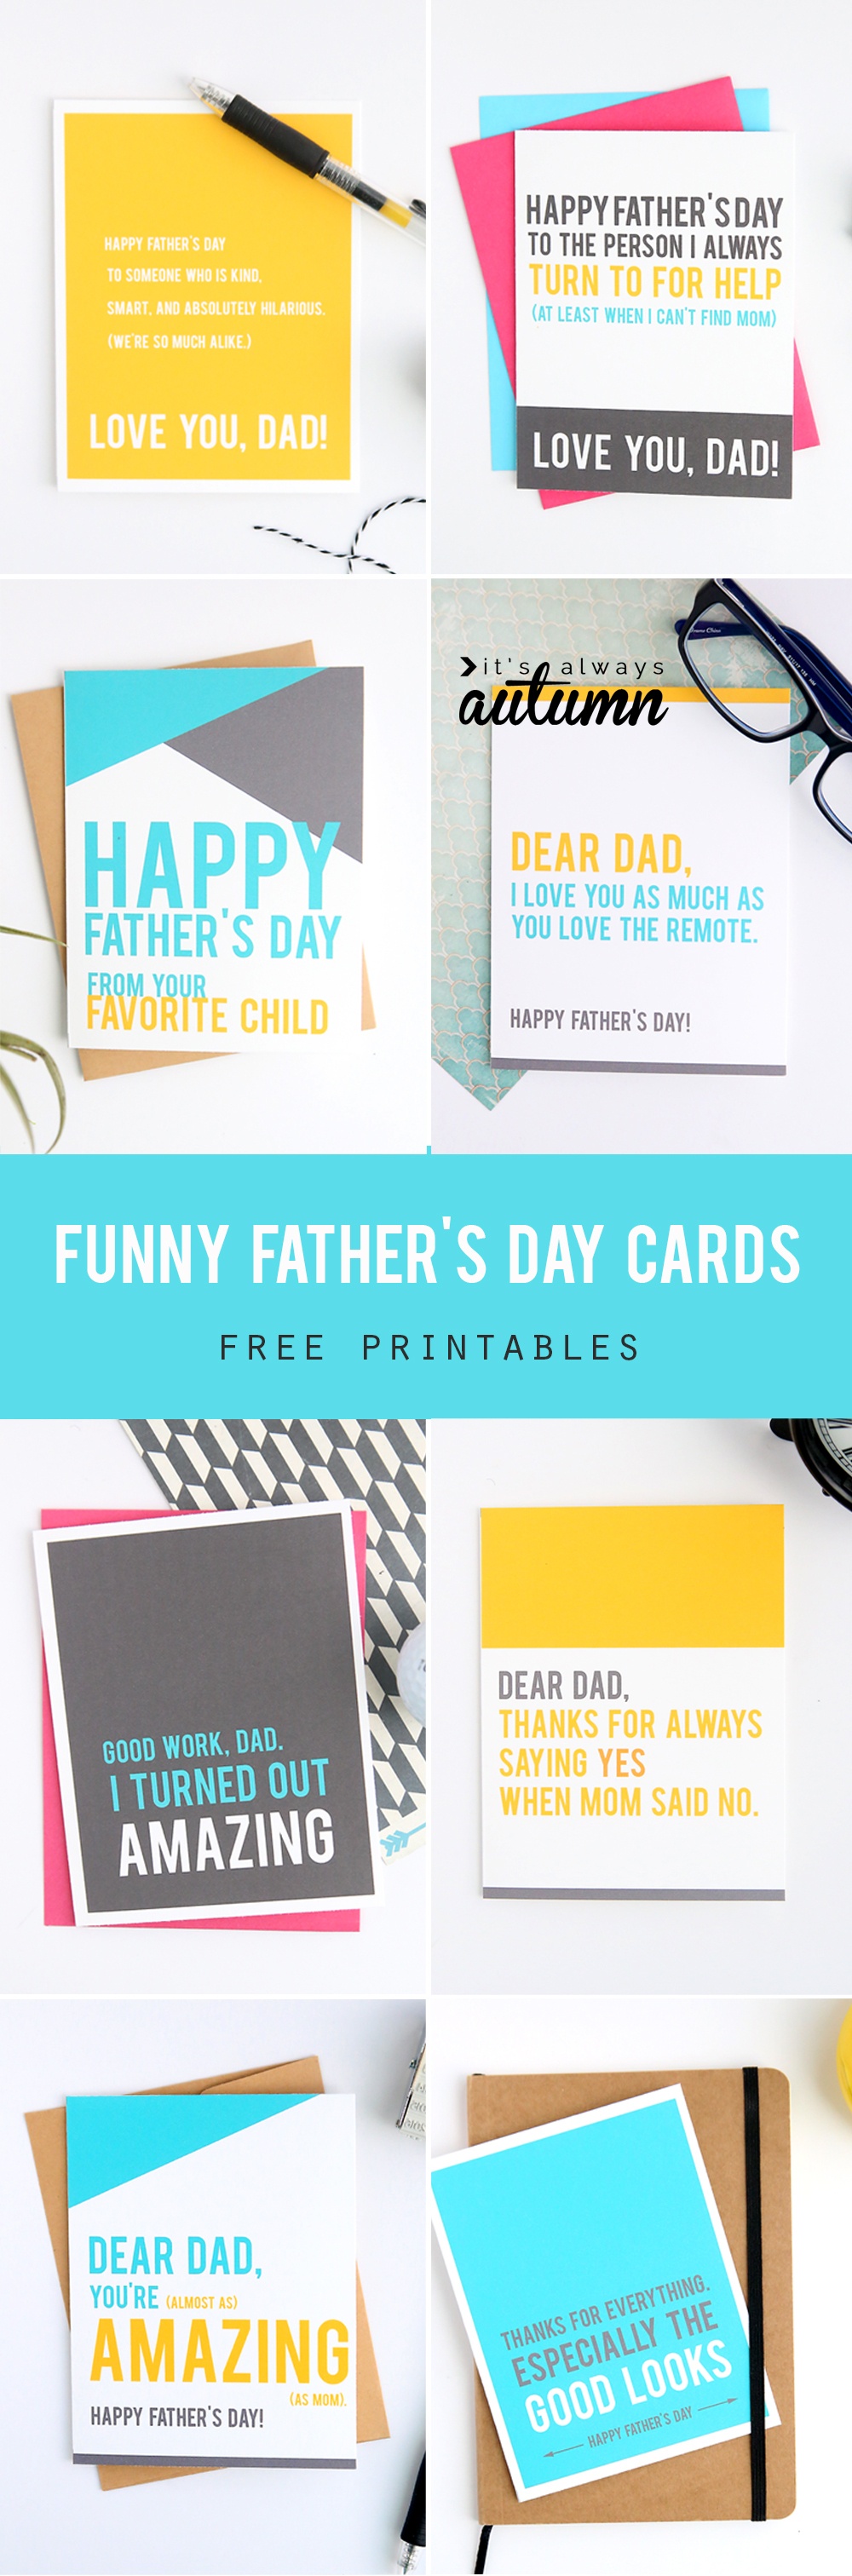 Funny Father&amp;#039;s Day Cards You Can Print At Home - It&amp;#039;s Always Autumn - Free Printable Funny Father&amp;#039;s Day Cards